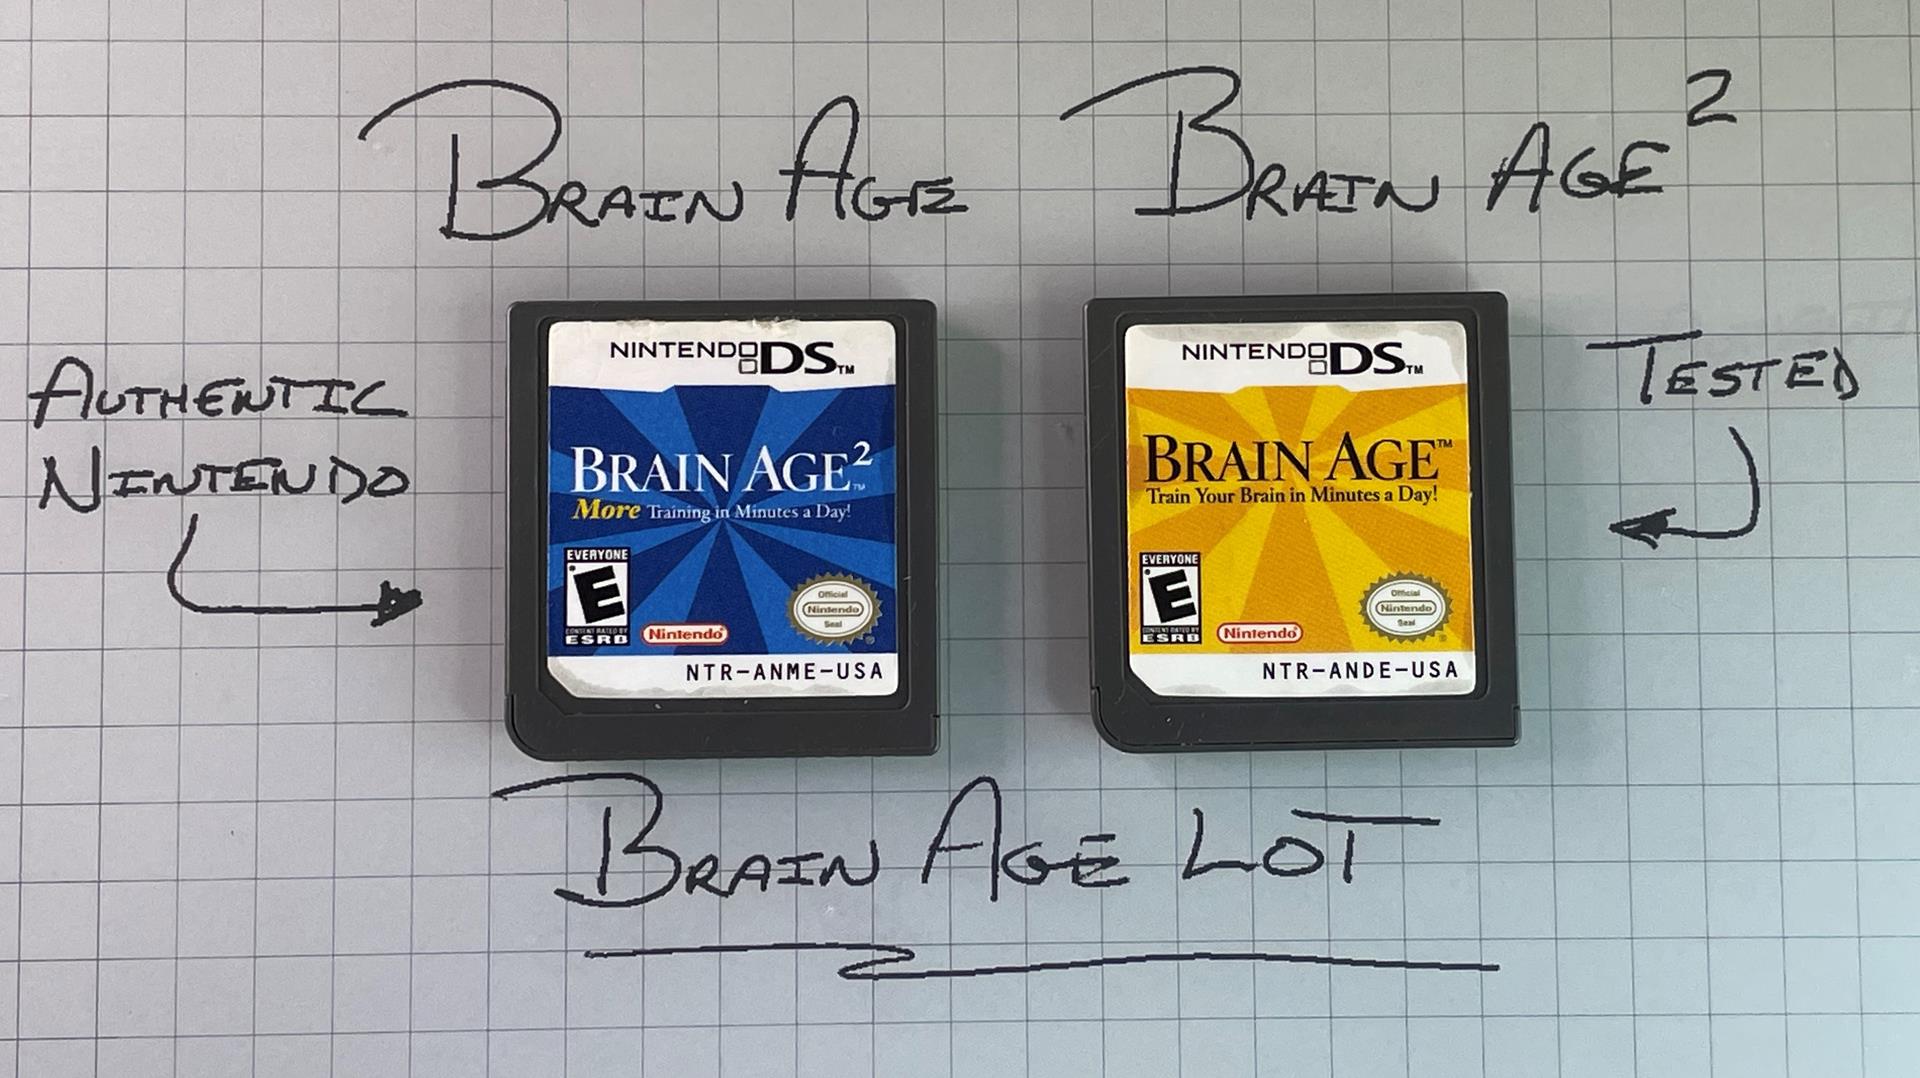 Brain age (DS). Brain age Nintendo DS. Brain age Nintendo. Flash Focus: Vision Training in minutes a Day Nintendo. Nintendo age